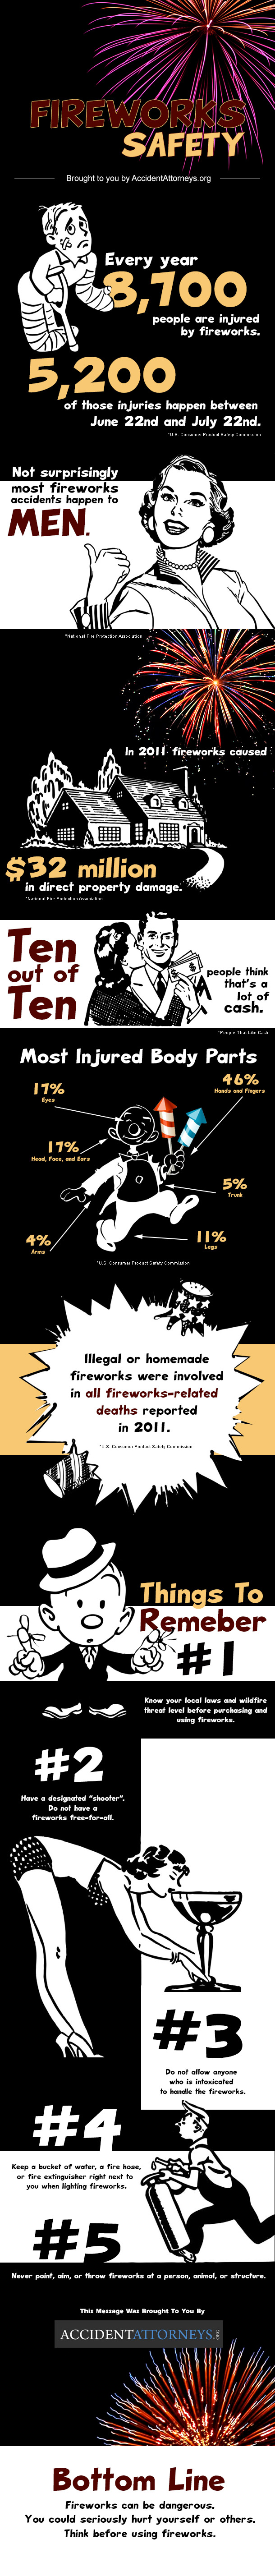 fireworks-safety-infographic